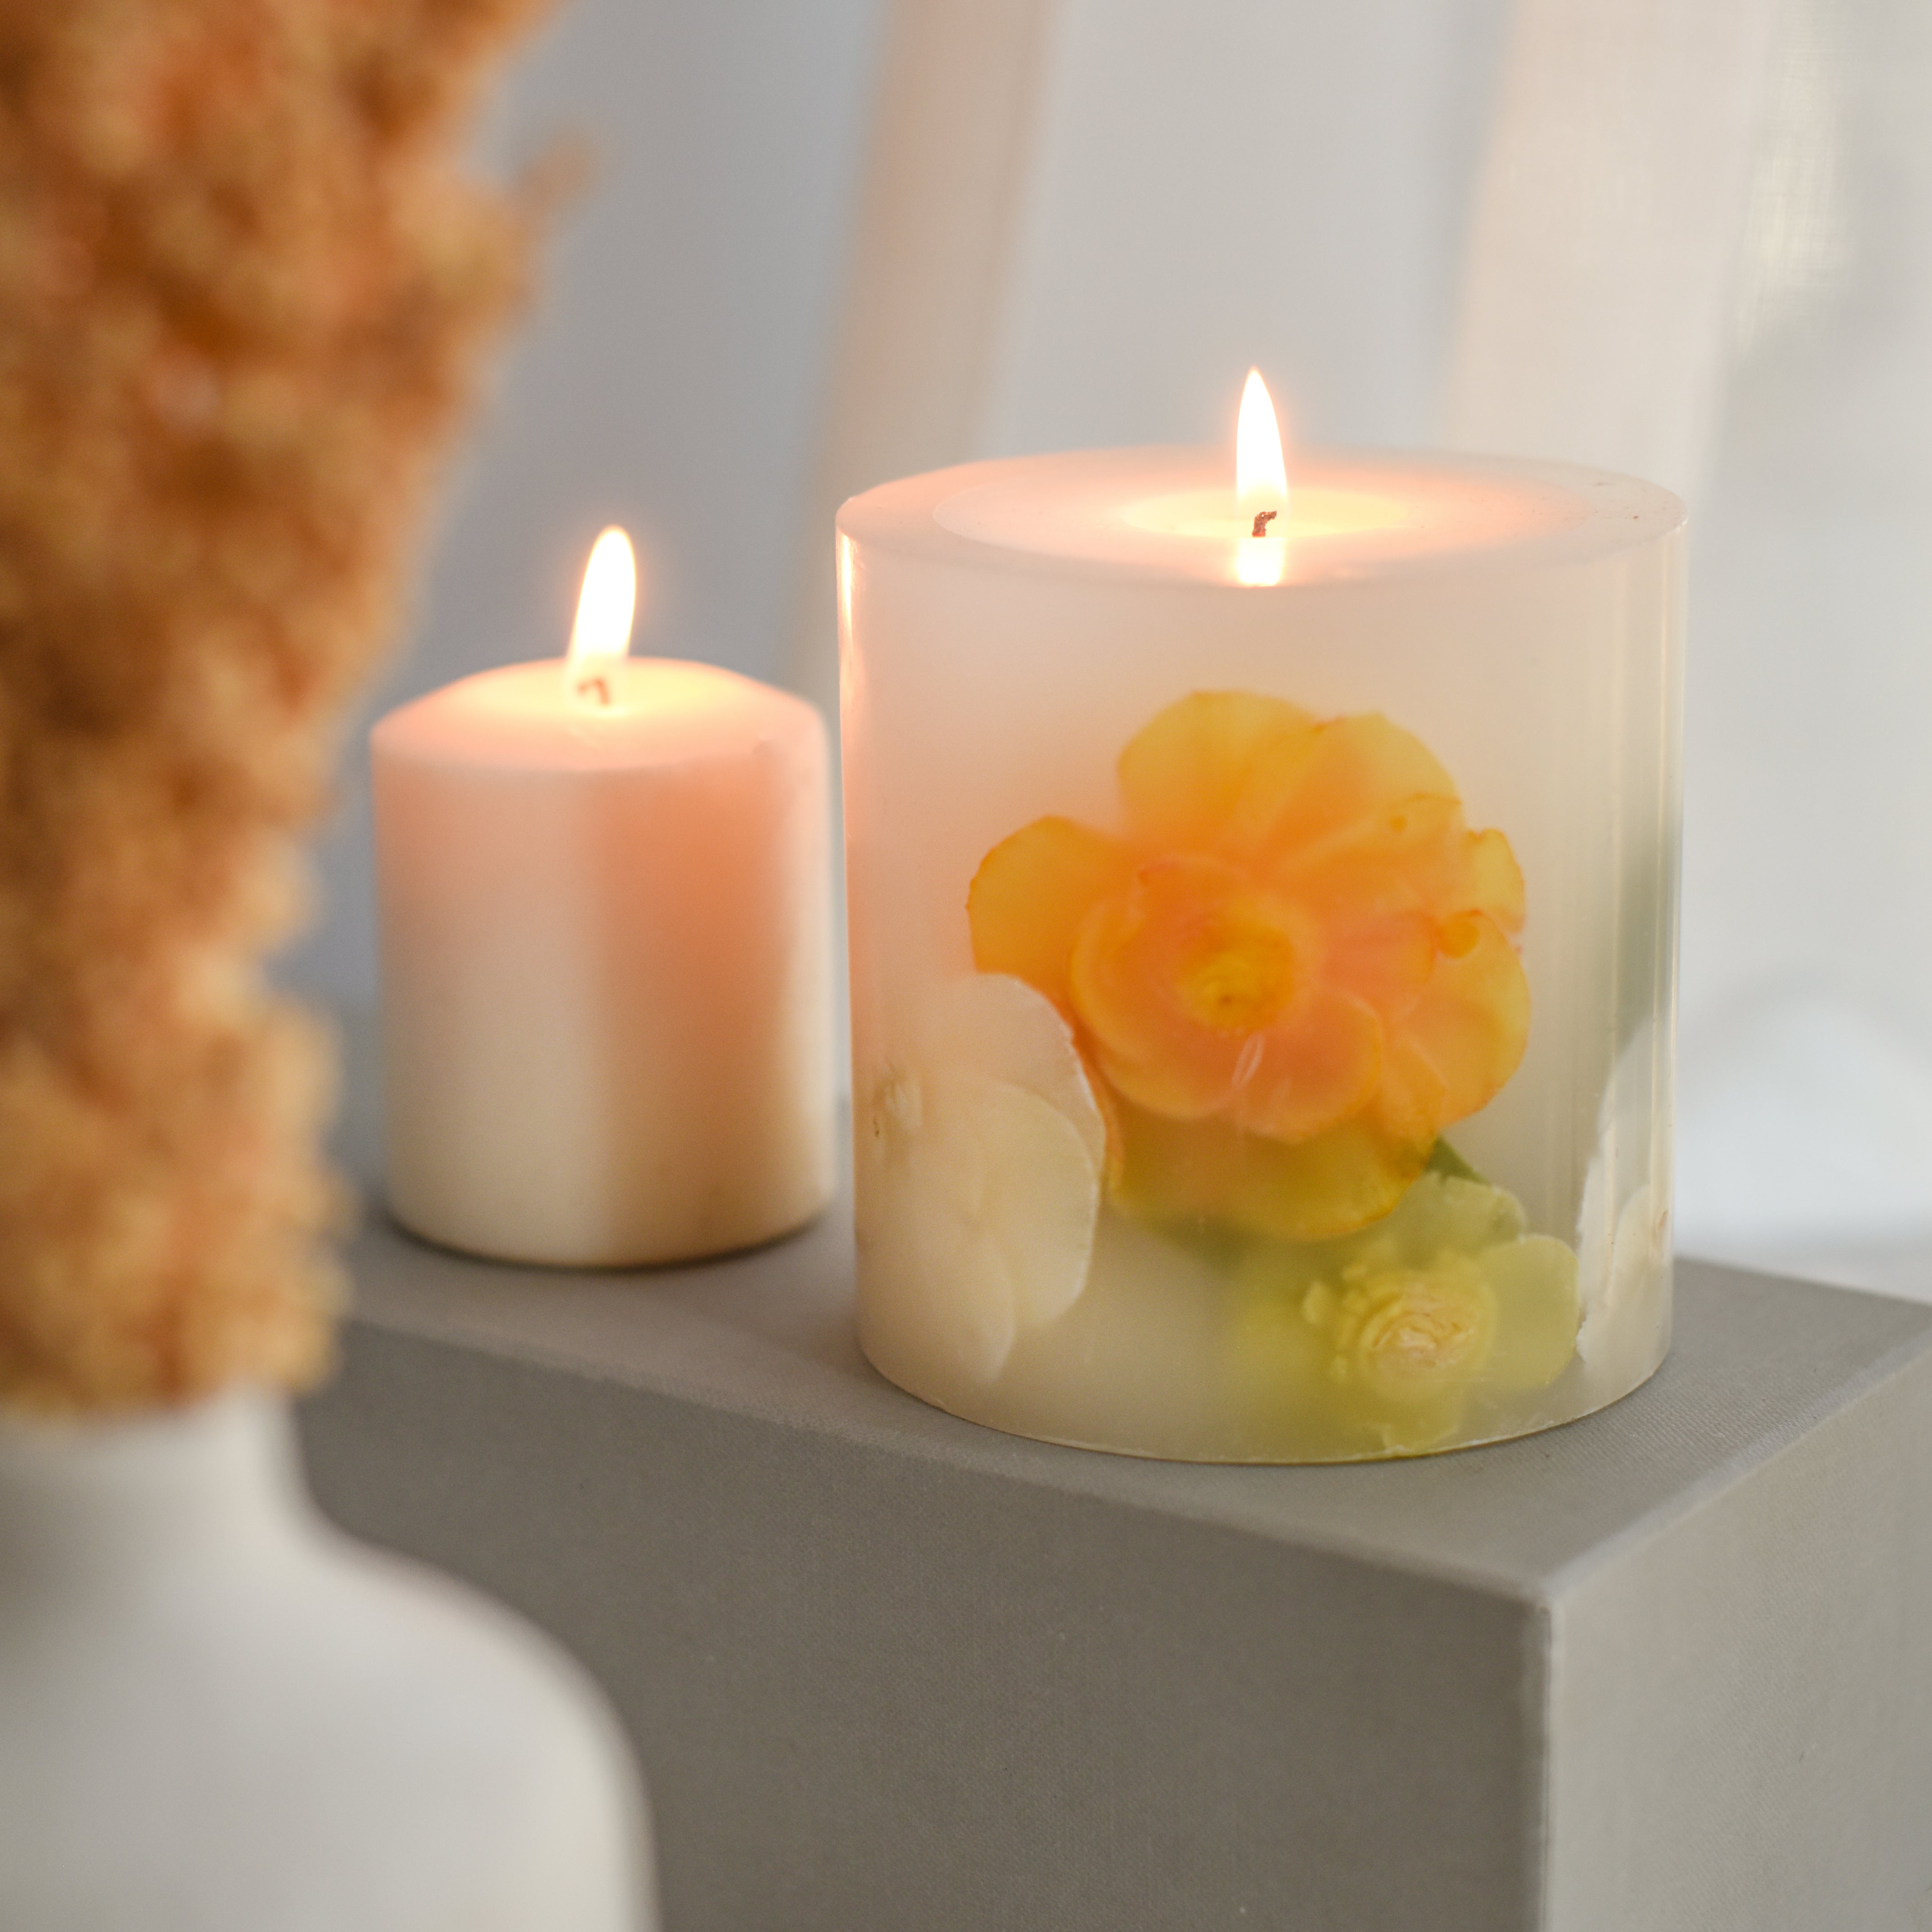 5 reasons why you need candles in the bathroom!